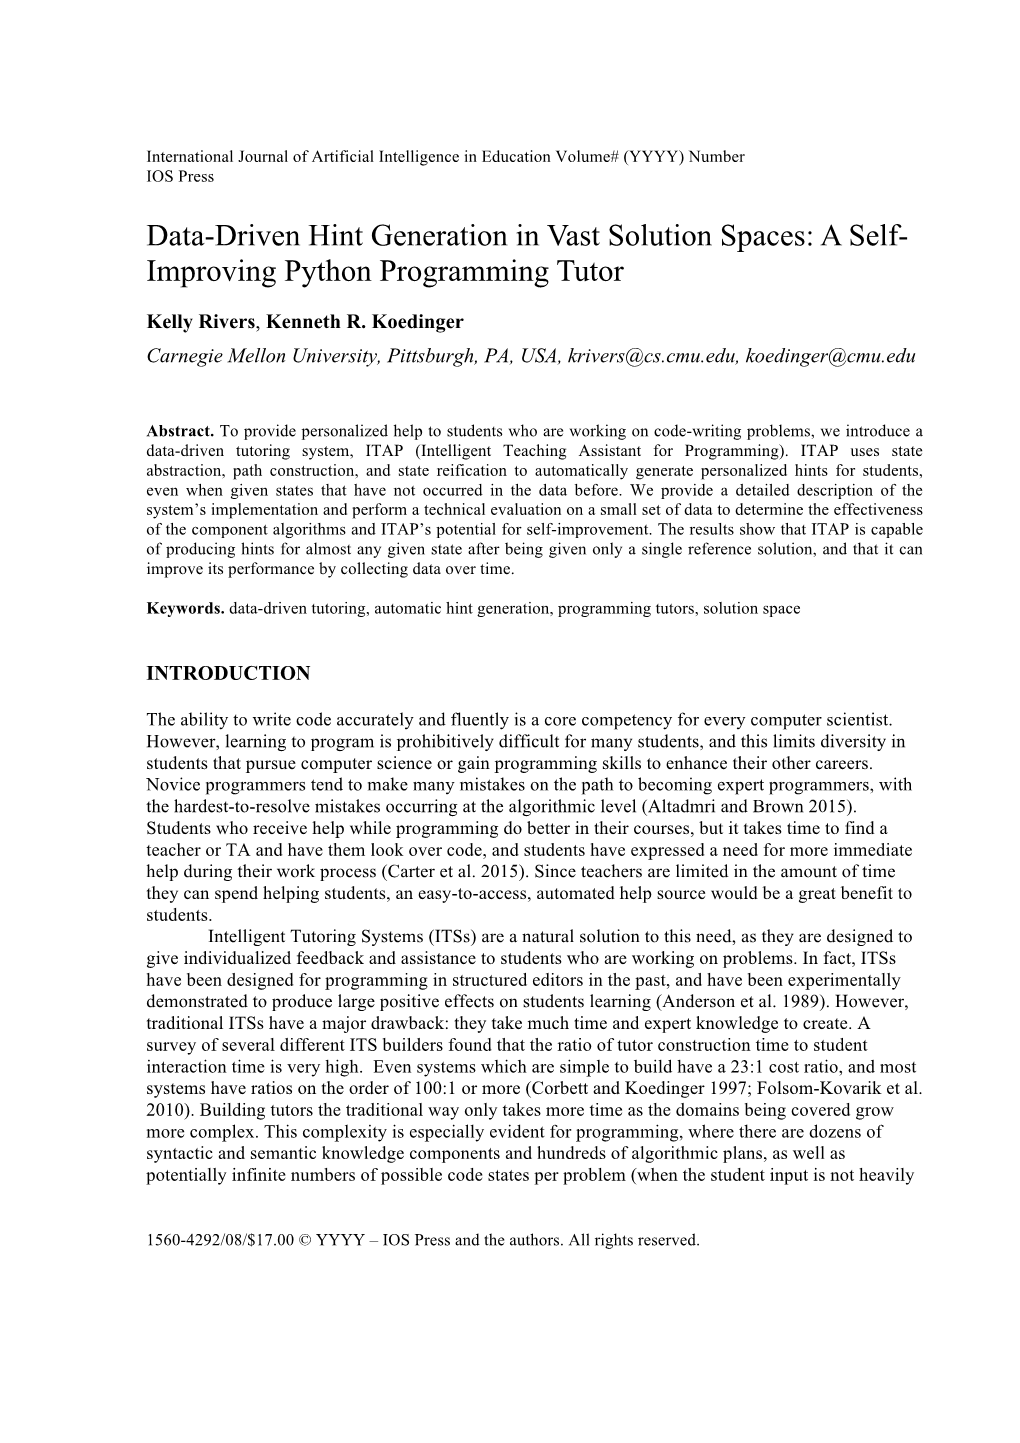 Data-Driven Hint Generation in Vast Solution Spaces: a Self- Improving Python Programming Tutor